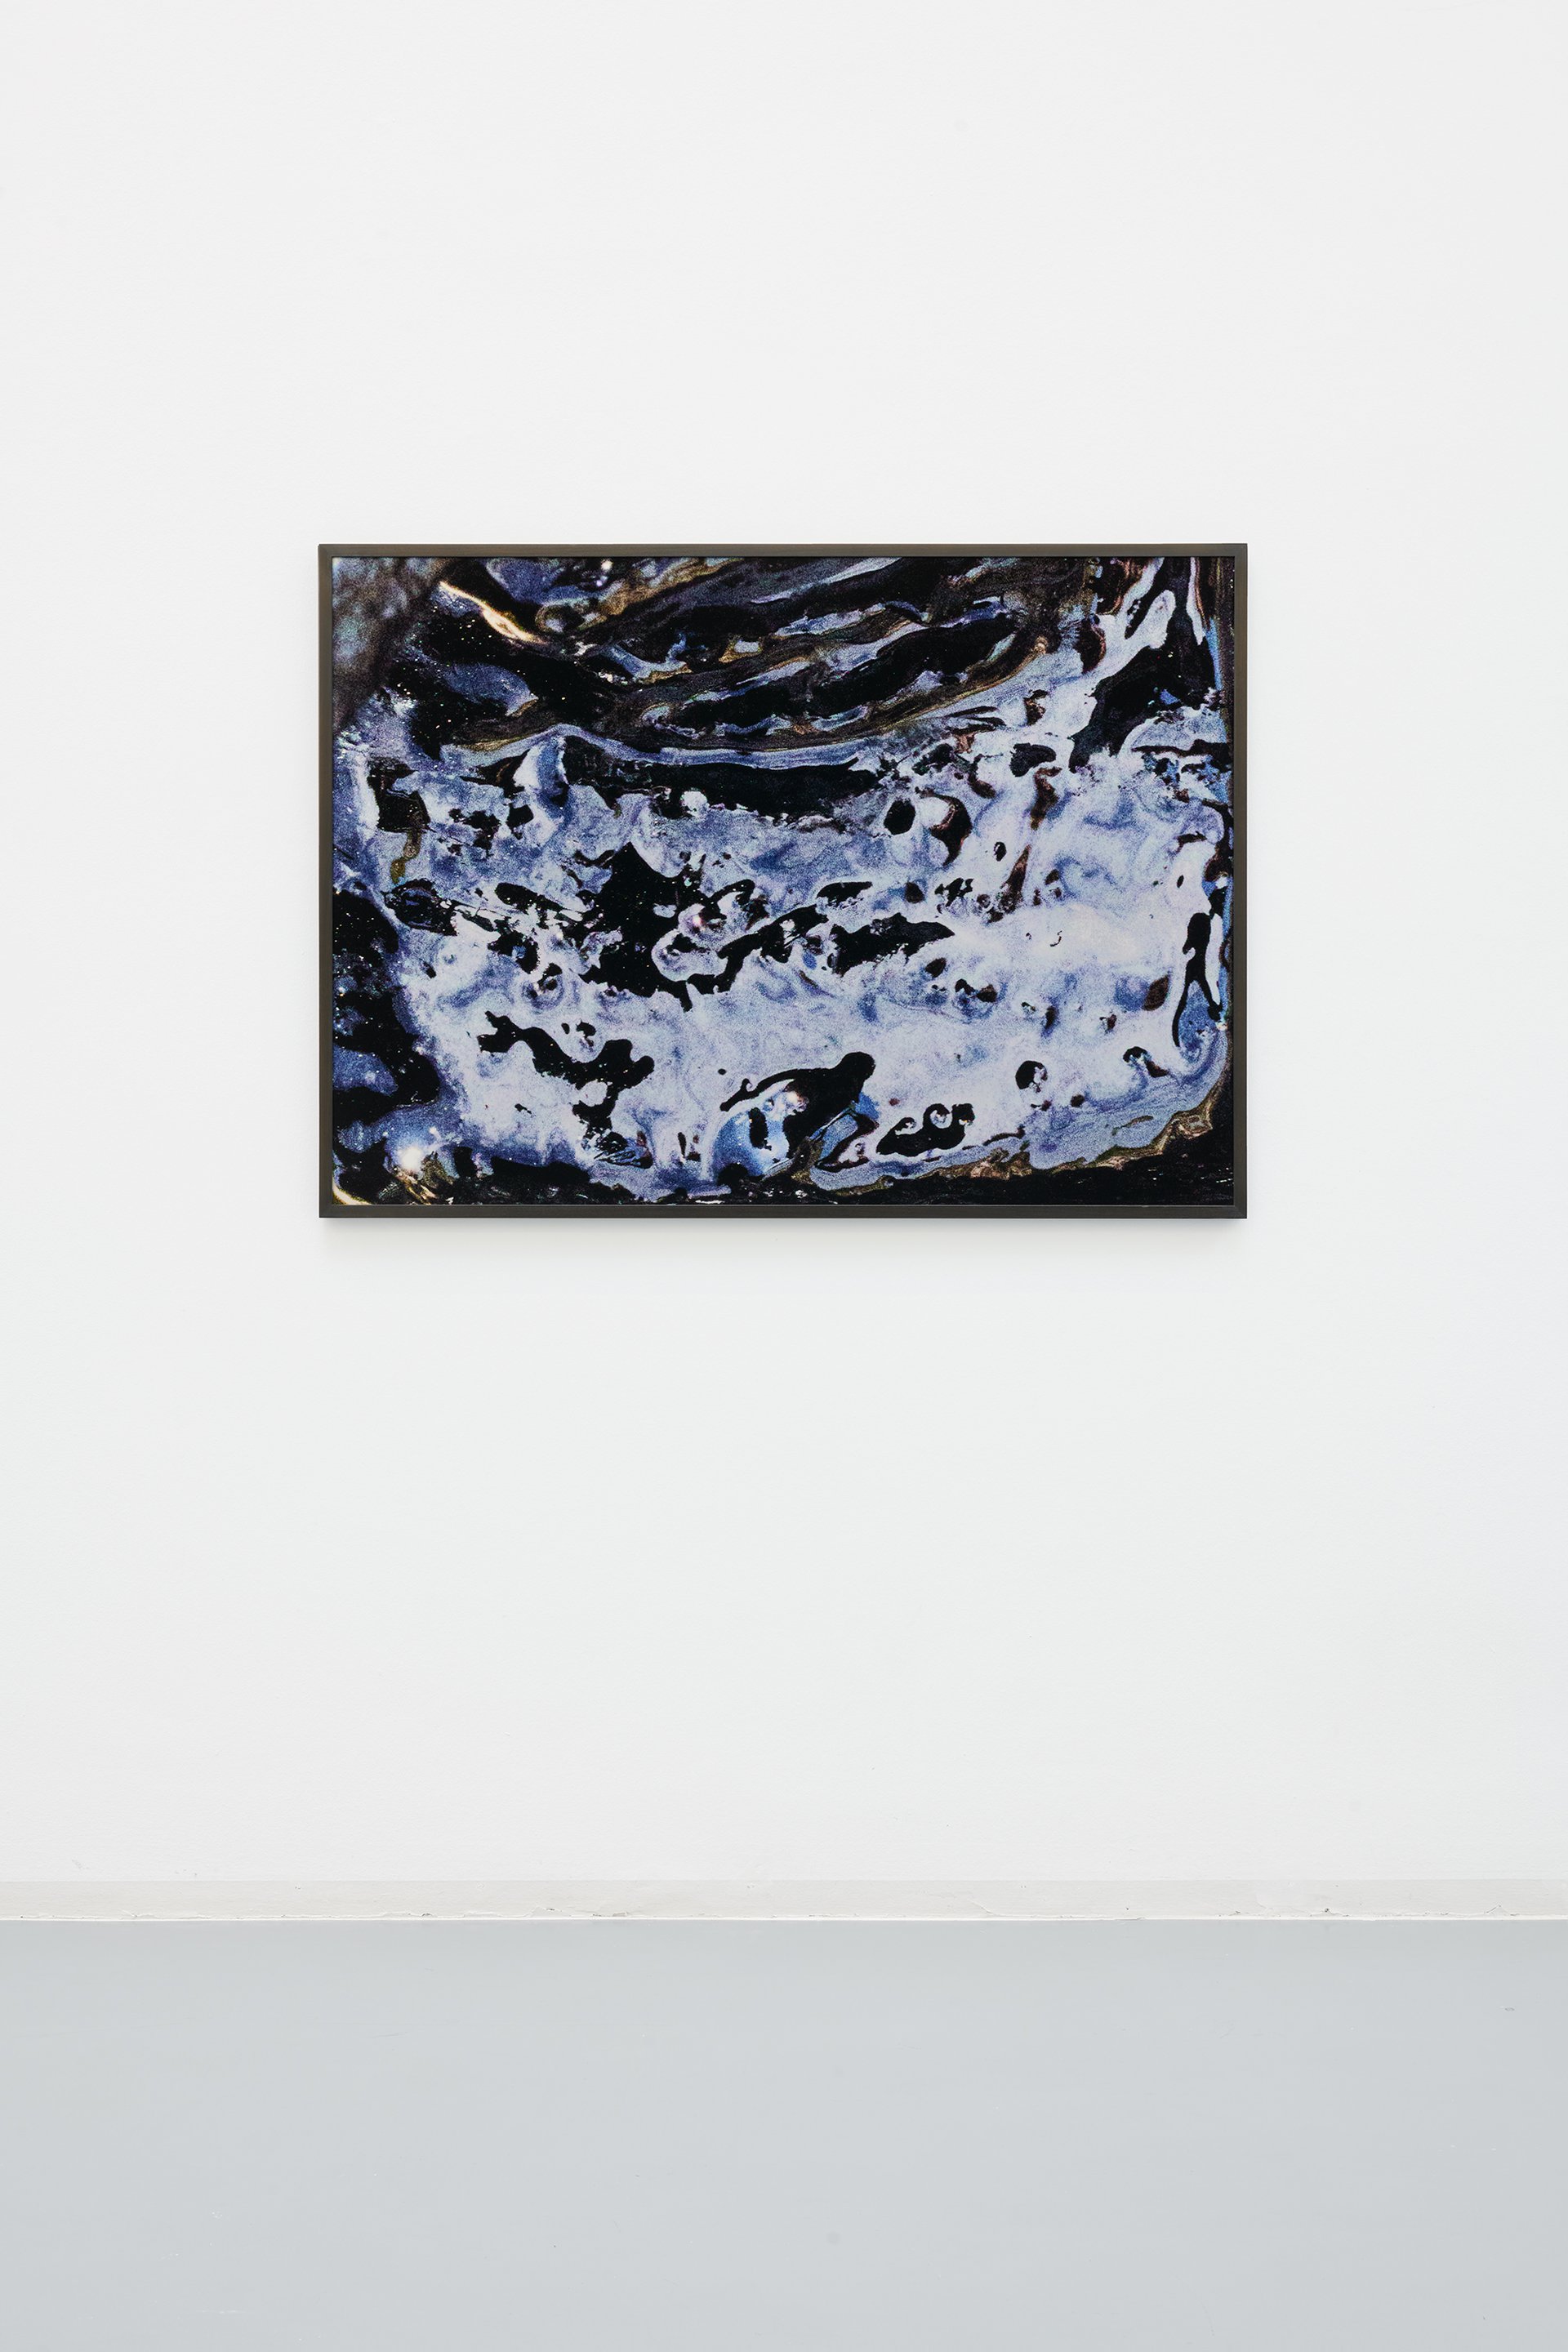 Lucie Stahl, Burrows (7), installation view, Lucie Stahl: Seven Sisters, Bonner Kunstverein, 2022. Courtesy the artist, Cabinet Gallery, London, dépendance, Brussels, Fitzpatrick Gallery, Paris and Los Angeles, and Galerie Meyer Kainer, Vienna. Photo: Mareike Tocha.